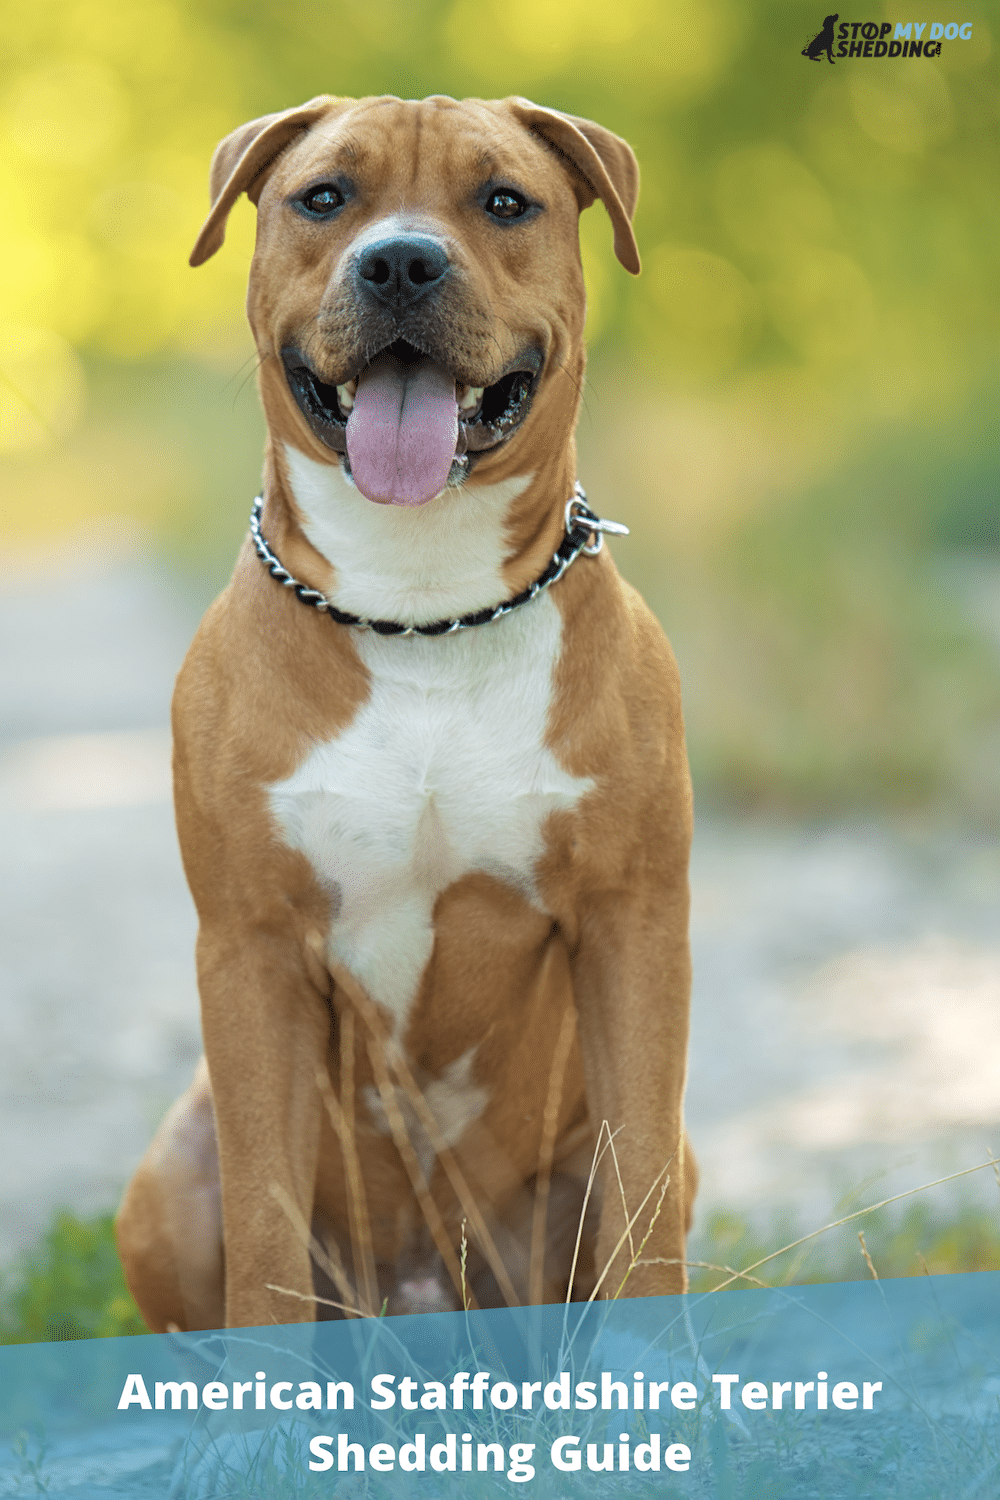 Do American Staffordshire Terriers Shed? (What to Expect)